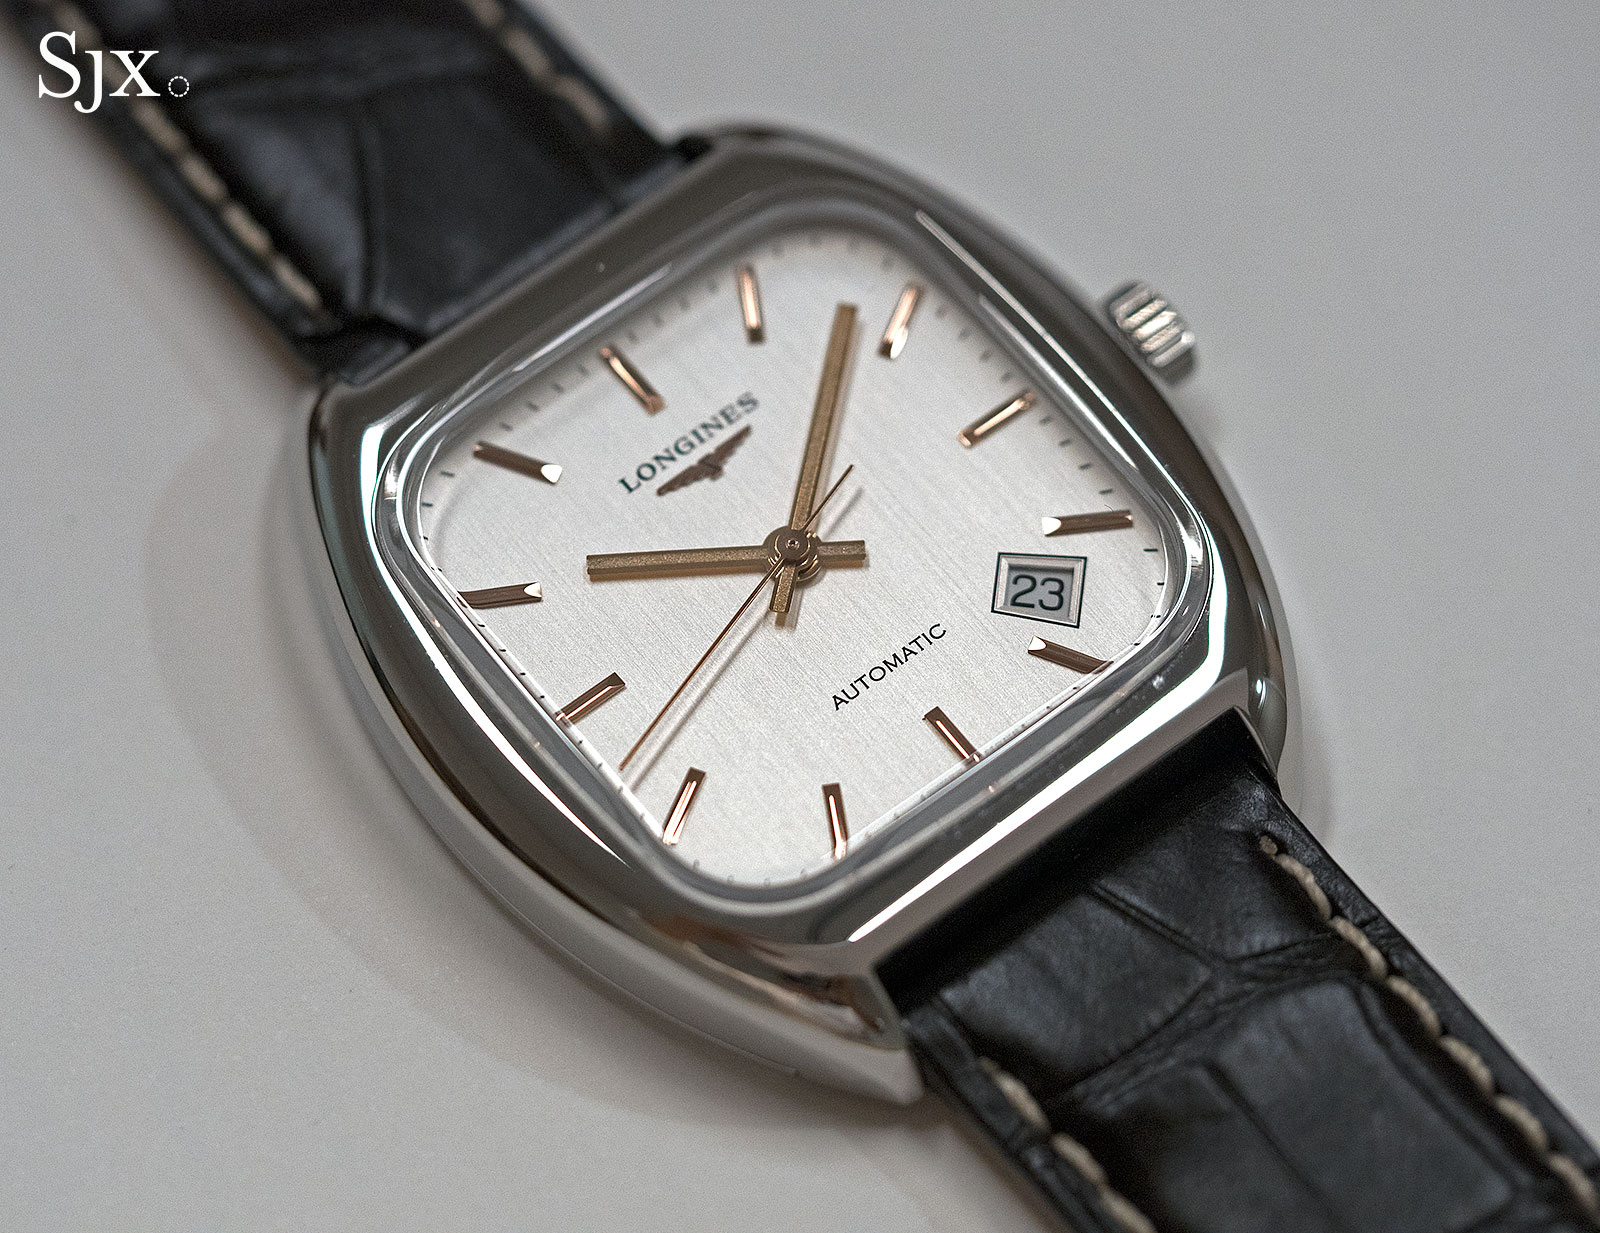 Hands-On with the Longines Heritage 1969 Automatic | SJX Watches